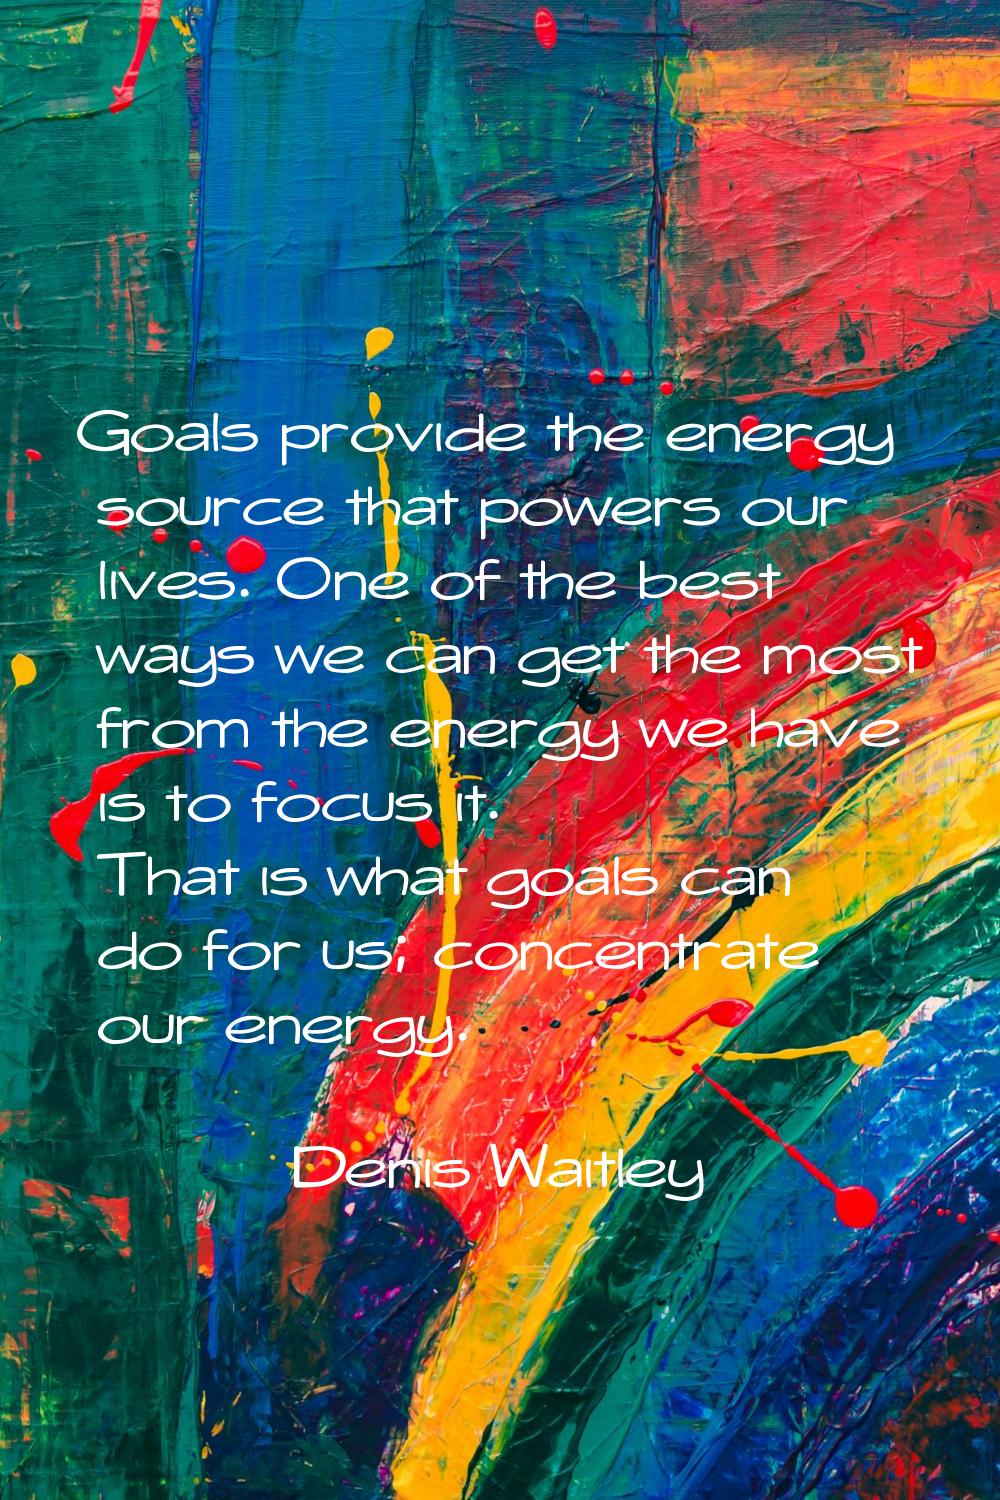 Goals provide the energy source that powers our lives. One of the best ways we can get the most fro